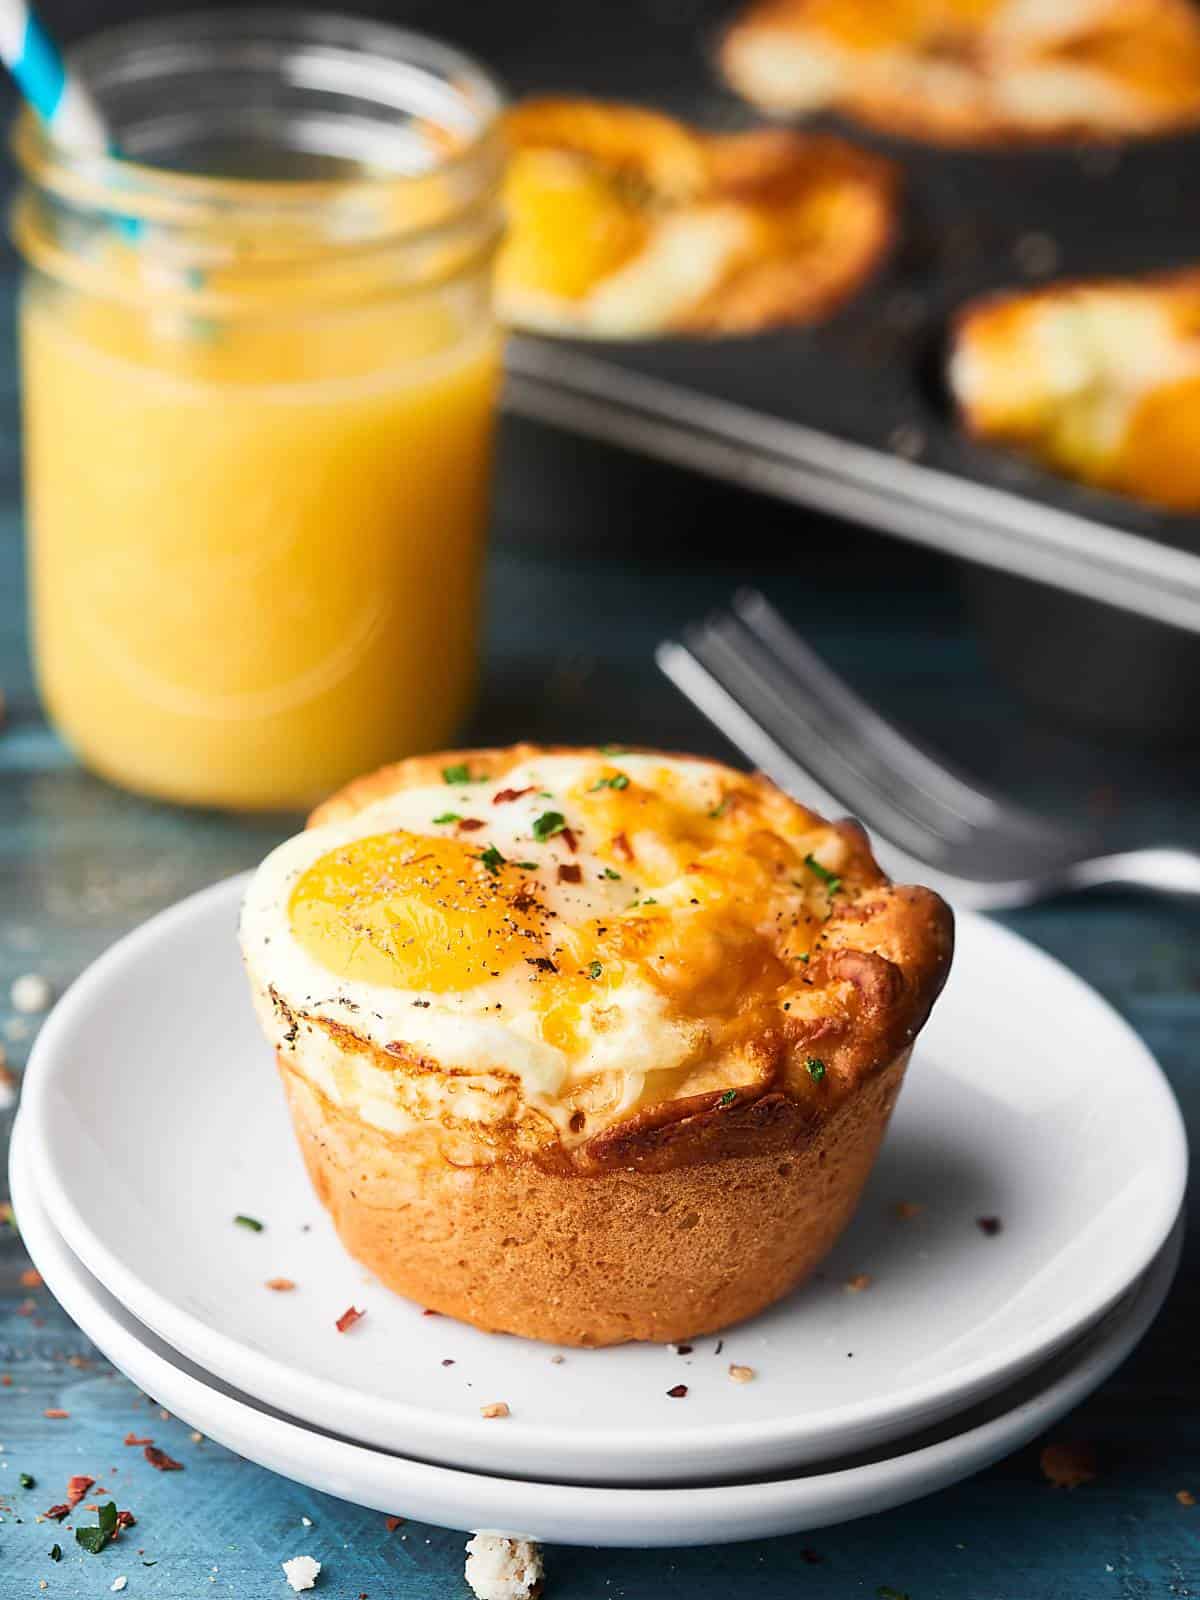 Sausage Egg and Cheese Biscuit Cups Recipe - 4 Ingredient Brunch!